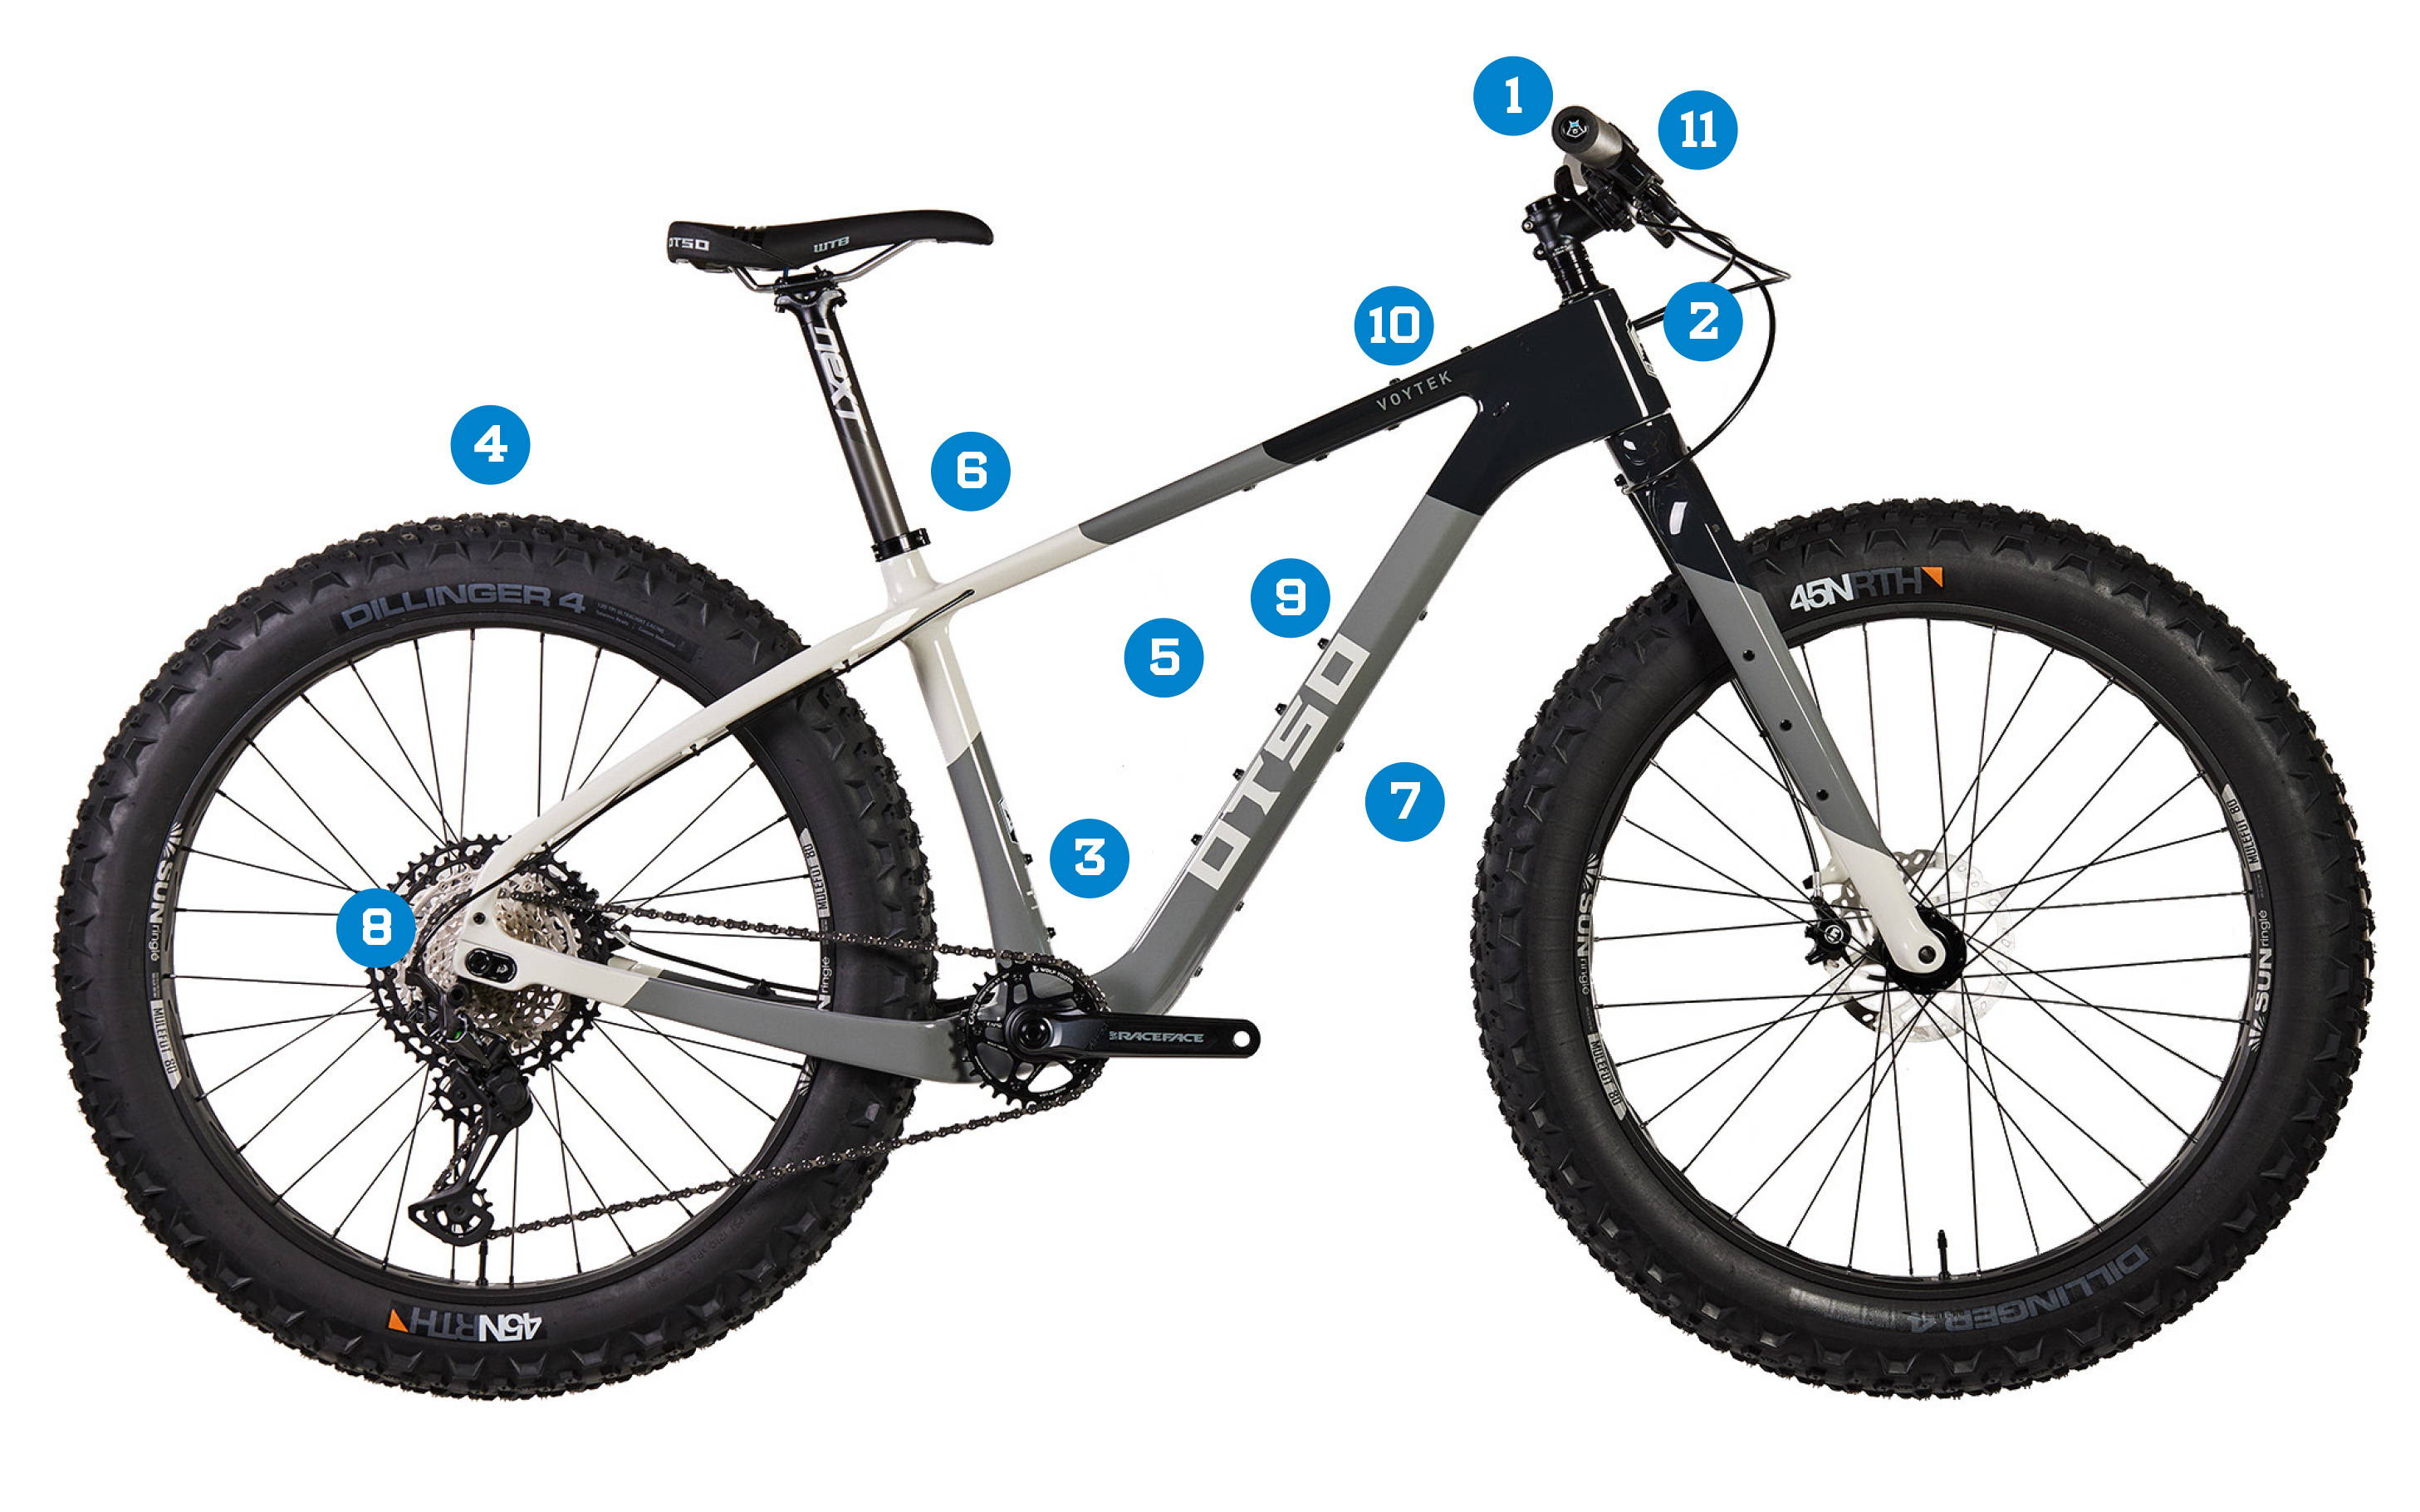 Black and gray Otso Voytek 2 fat bike with numbers to denote the location of features.